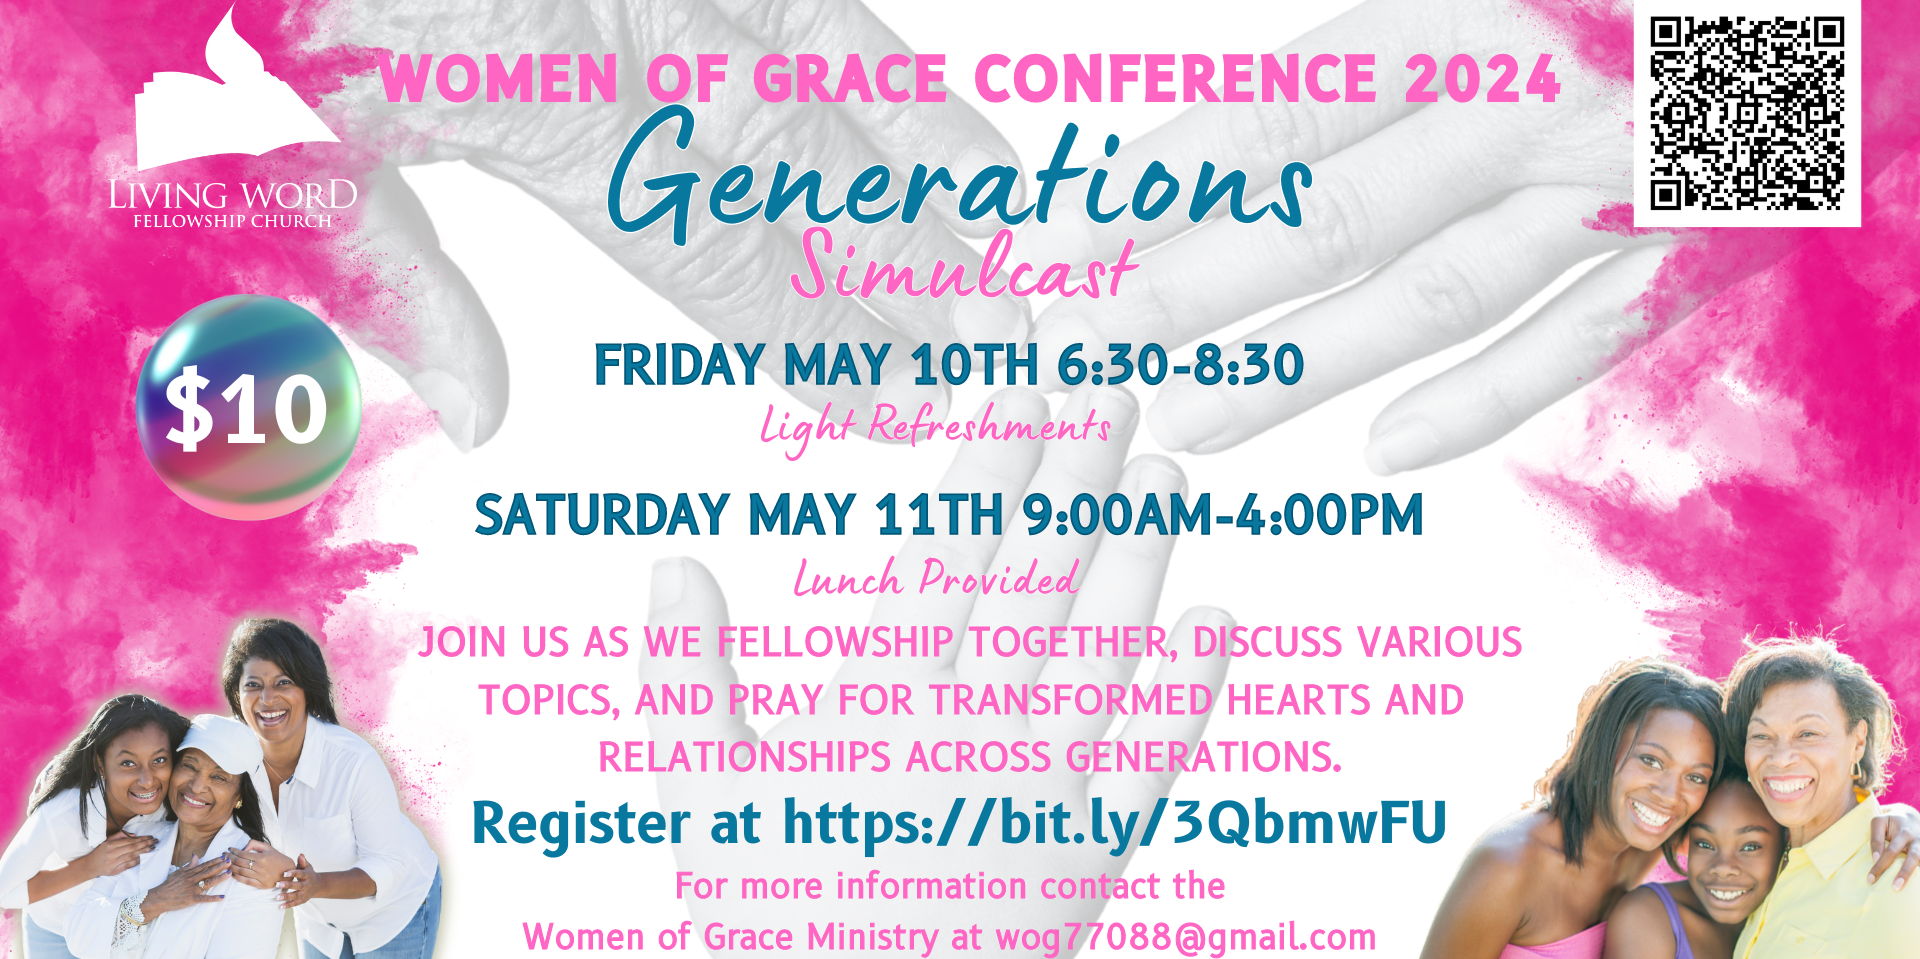 Women of Grace Generations Conference promotional image